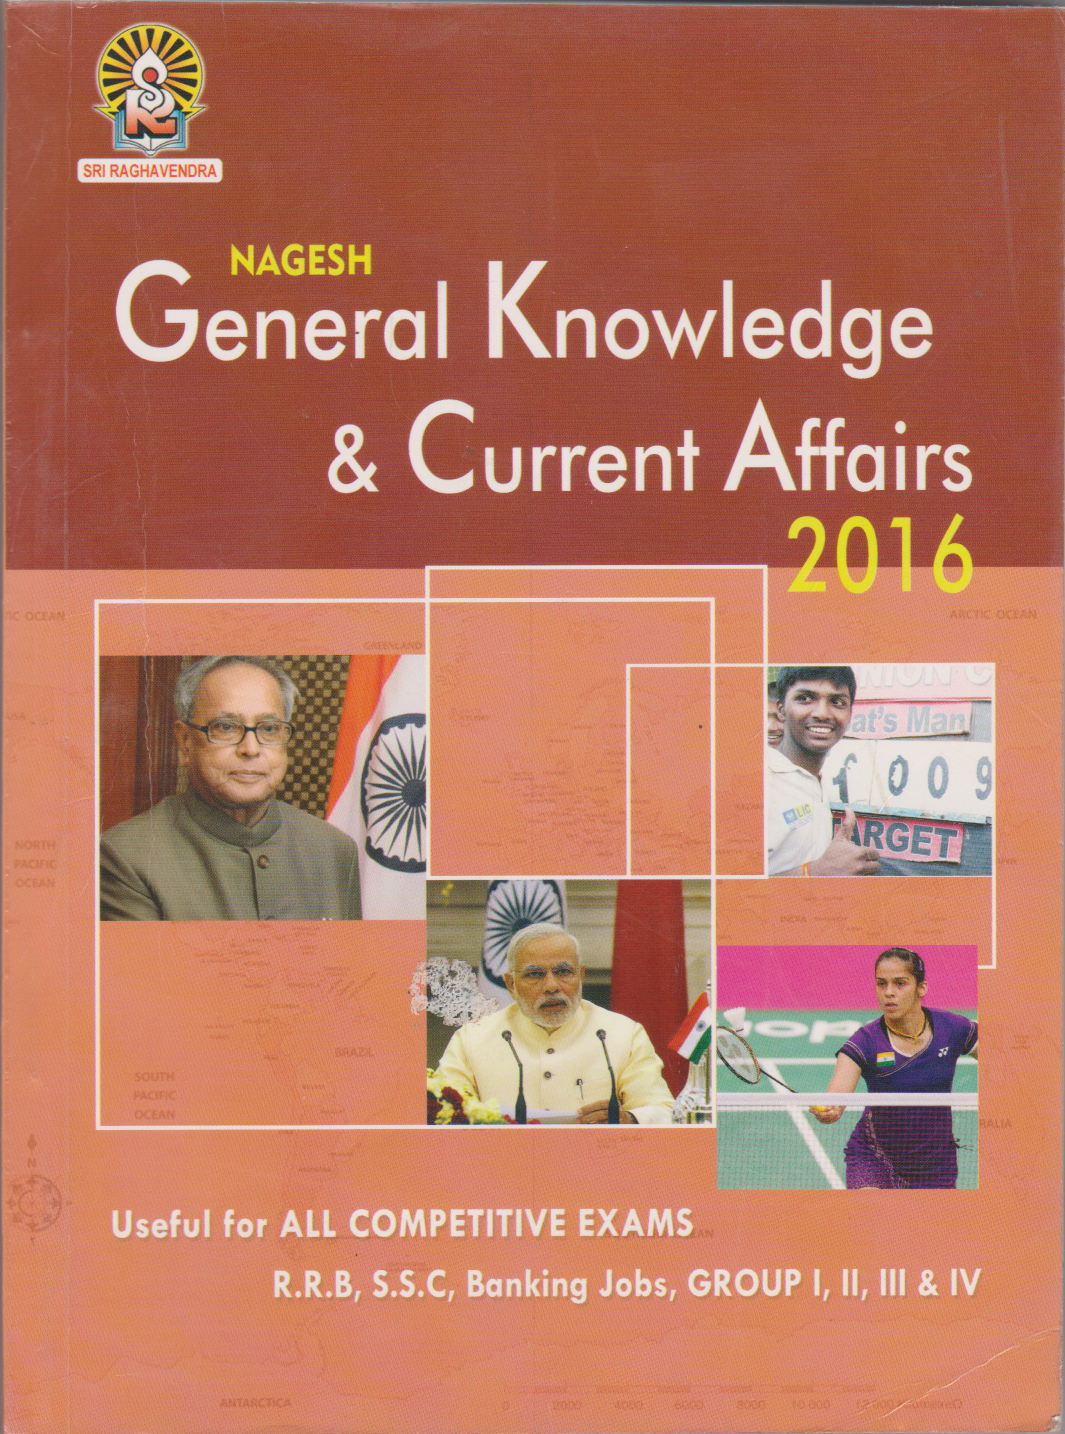 General Knowledge & Current Affairs 2016 by Nagesh